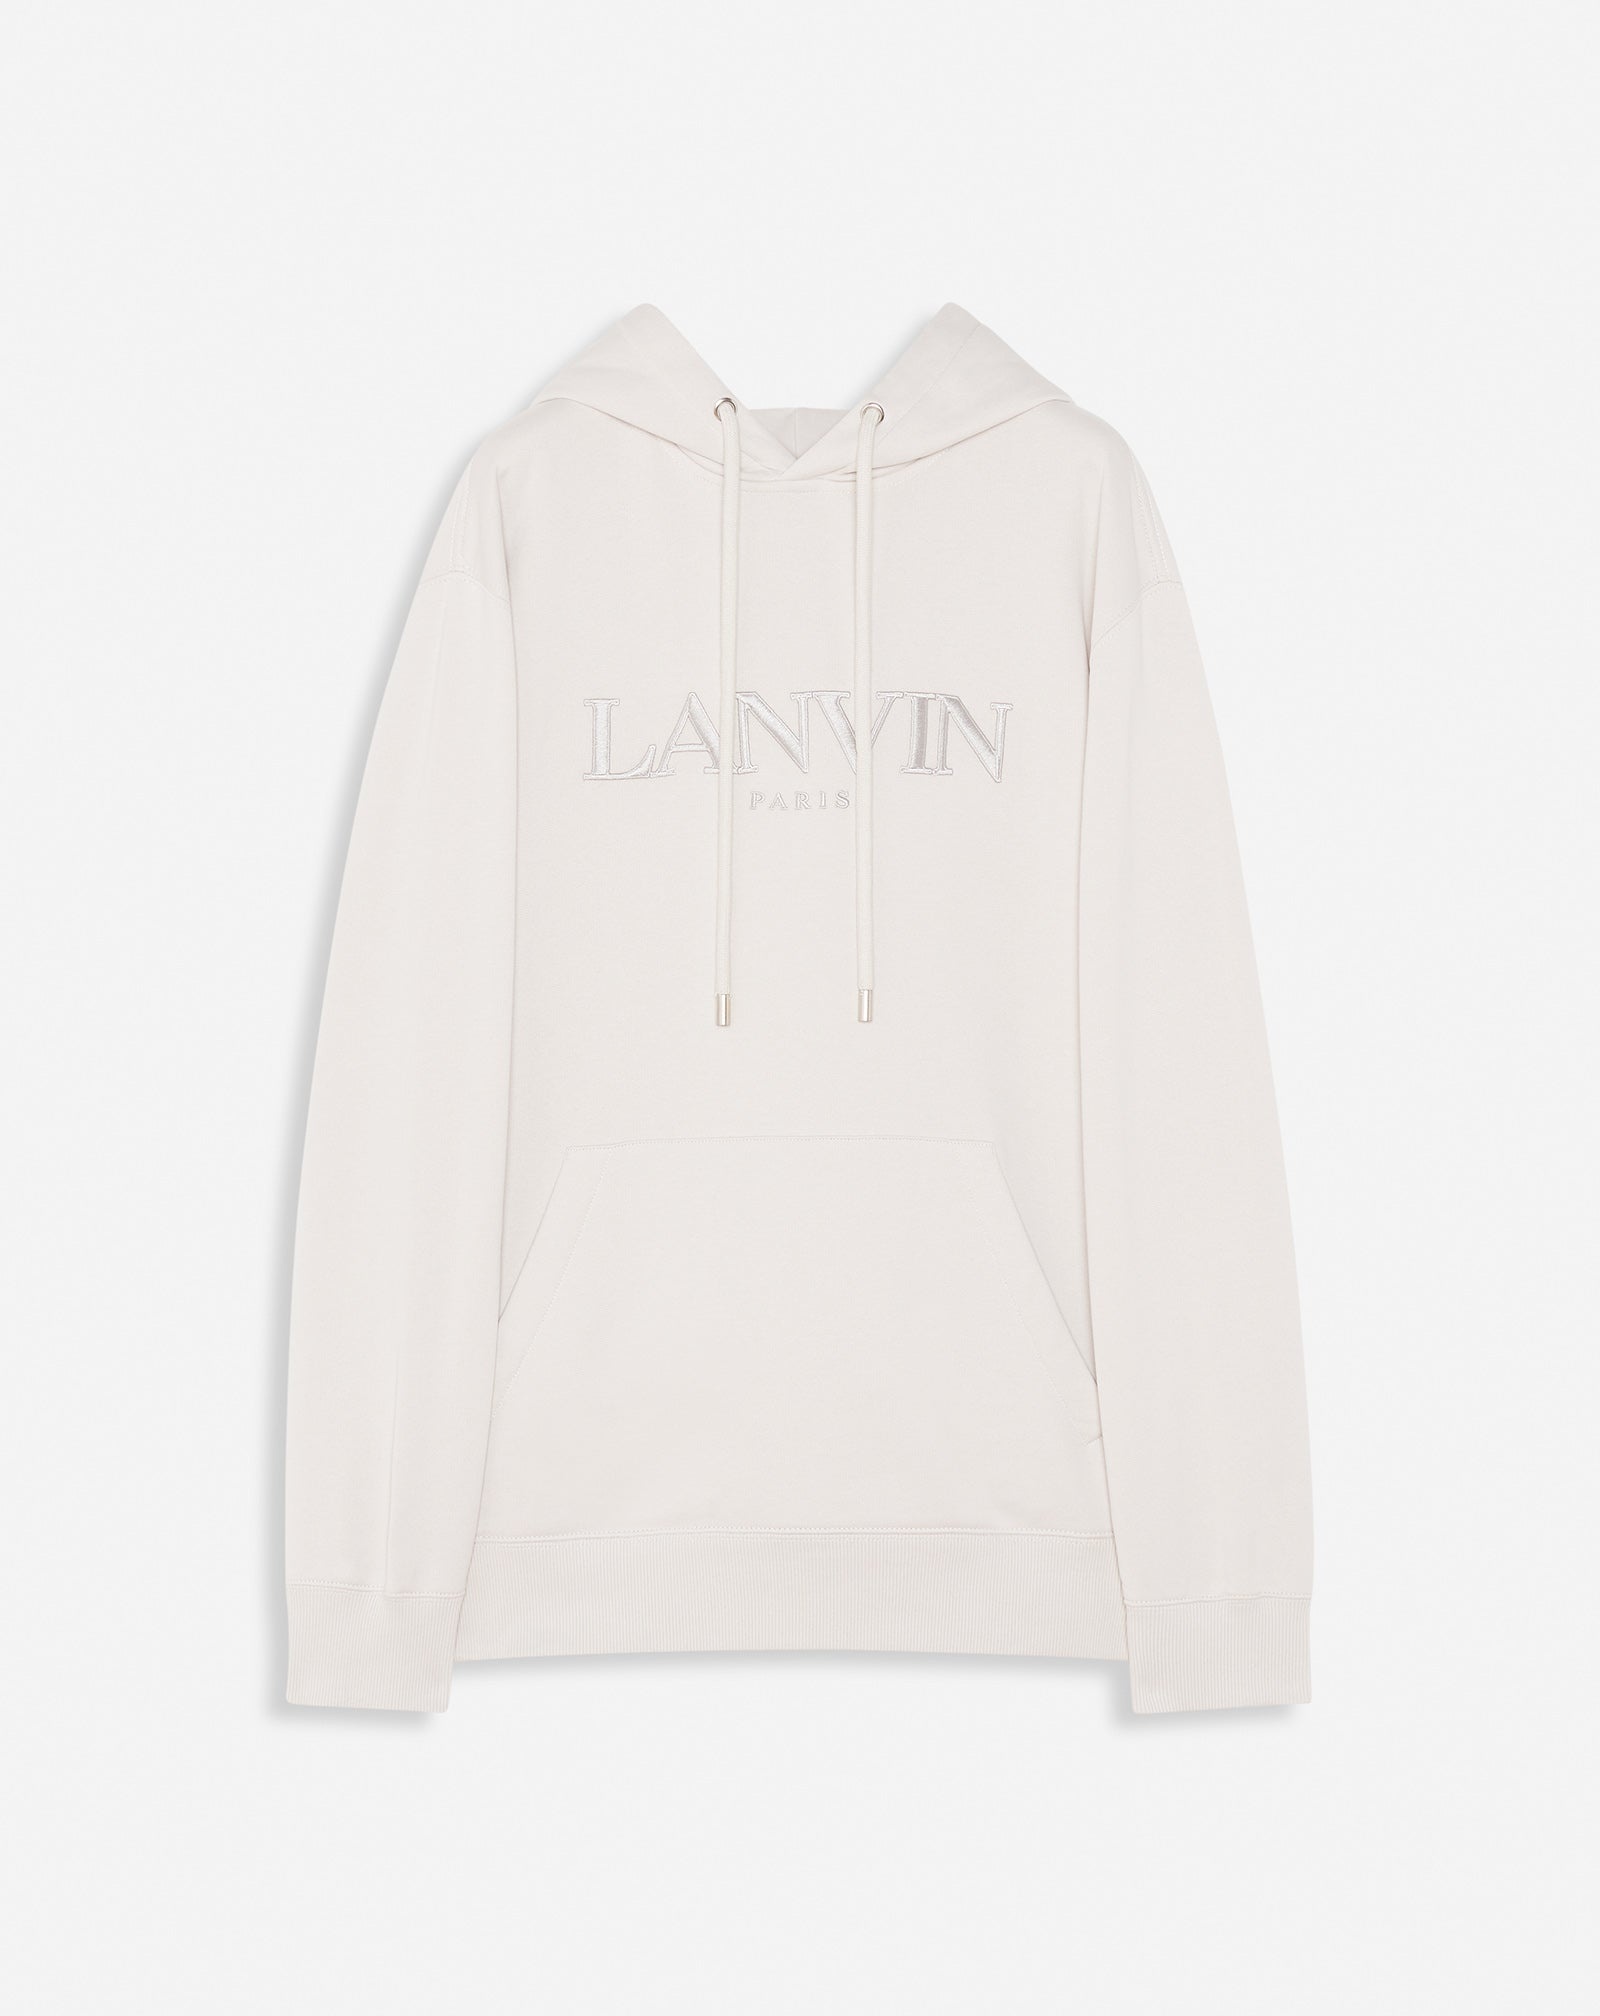 OVERSIZED EMBROIDERED LANVIN PARIS HOODIE - 1